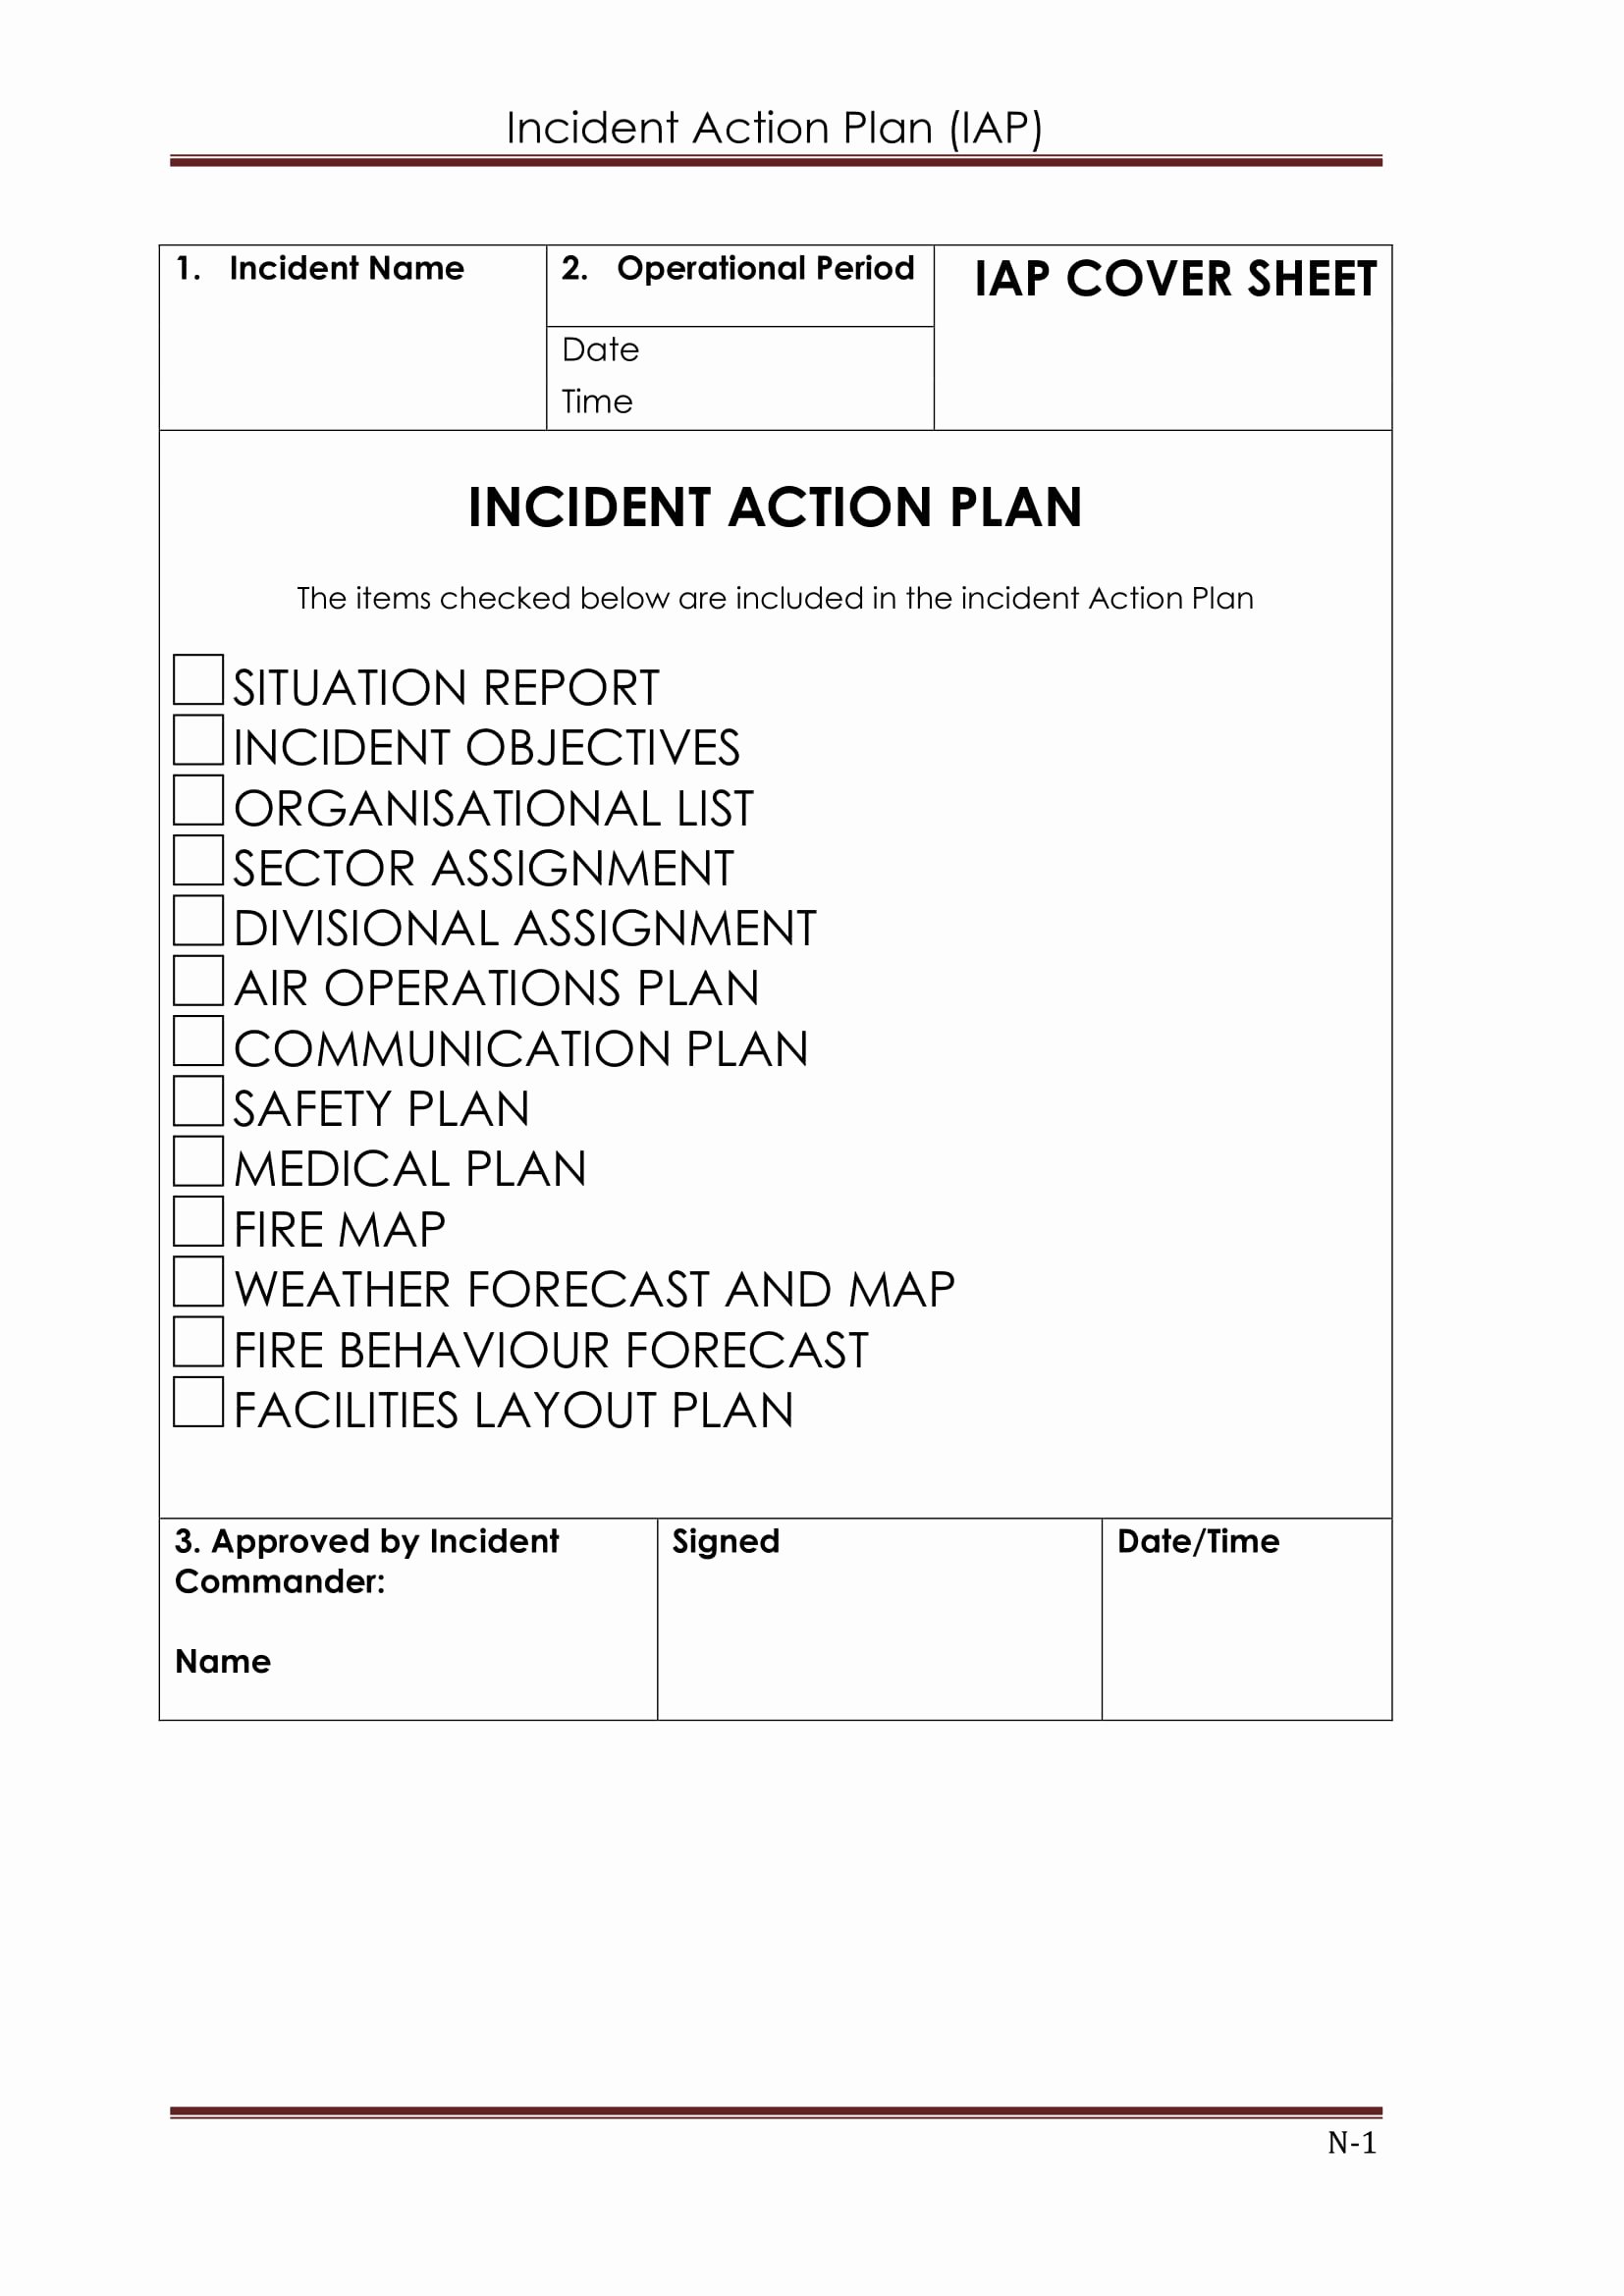 Incident Action Plan Template Luxury 10 Incident Action Plan Templates Pdf Word